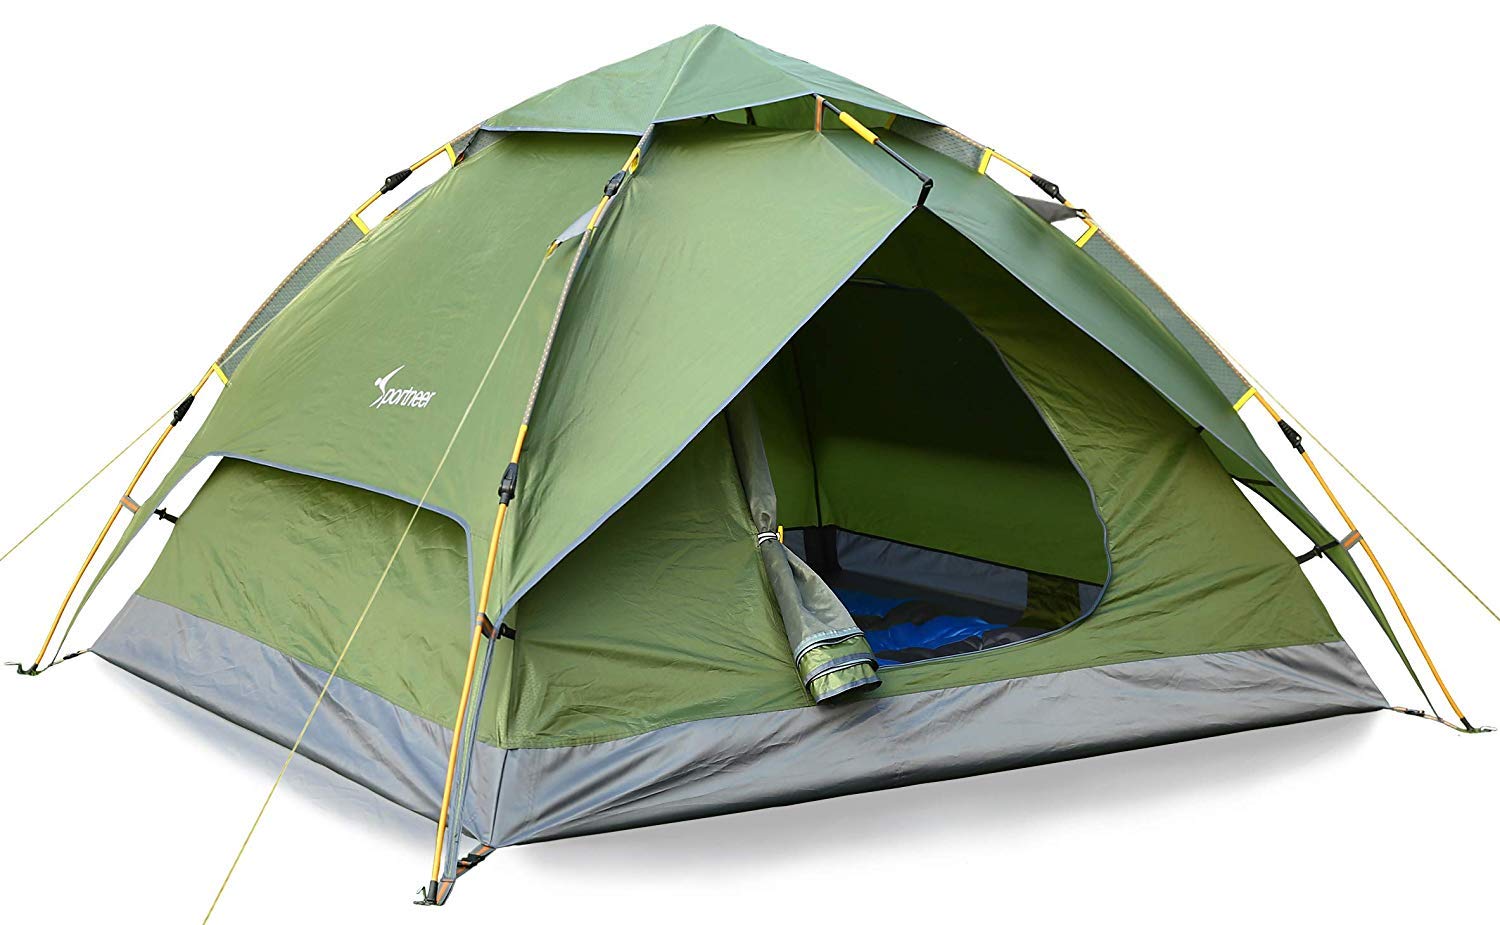 FDN Life Magazine - Camping or Outdoors Tent for Digital Nomad, Freelancer, Remote Worker or Location Independent - From Amazon.com